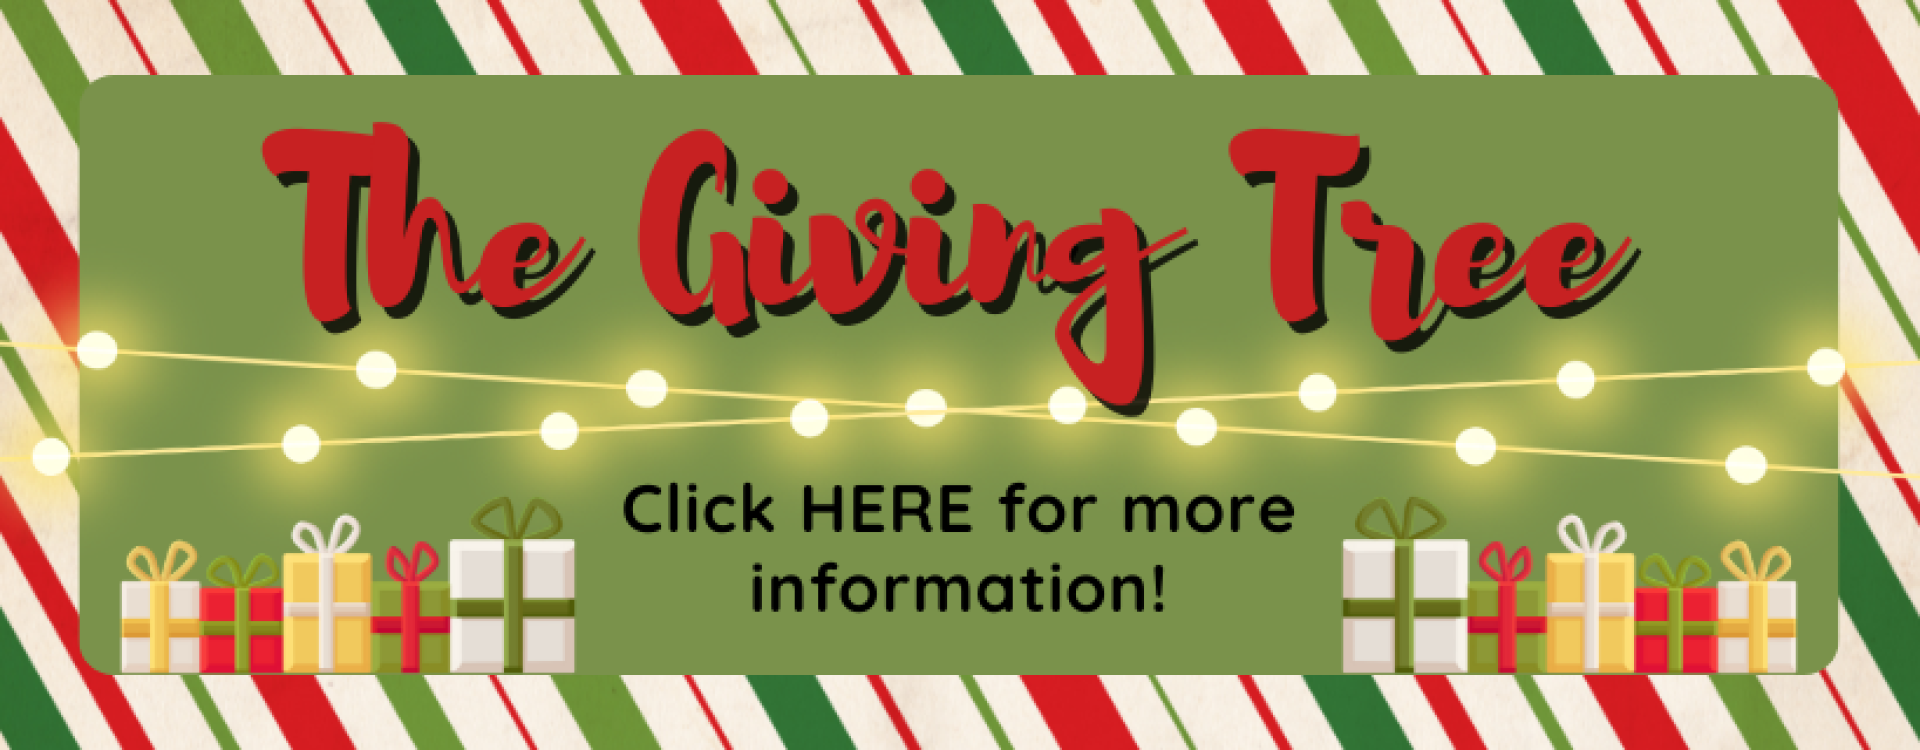 Click here for more info on the Giving Tree!